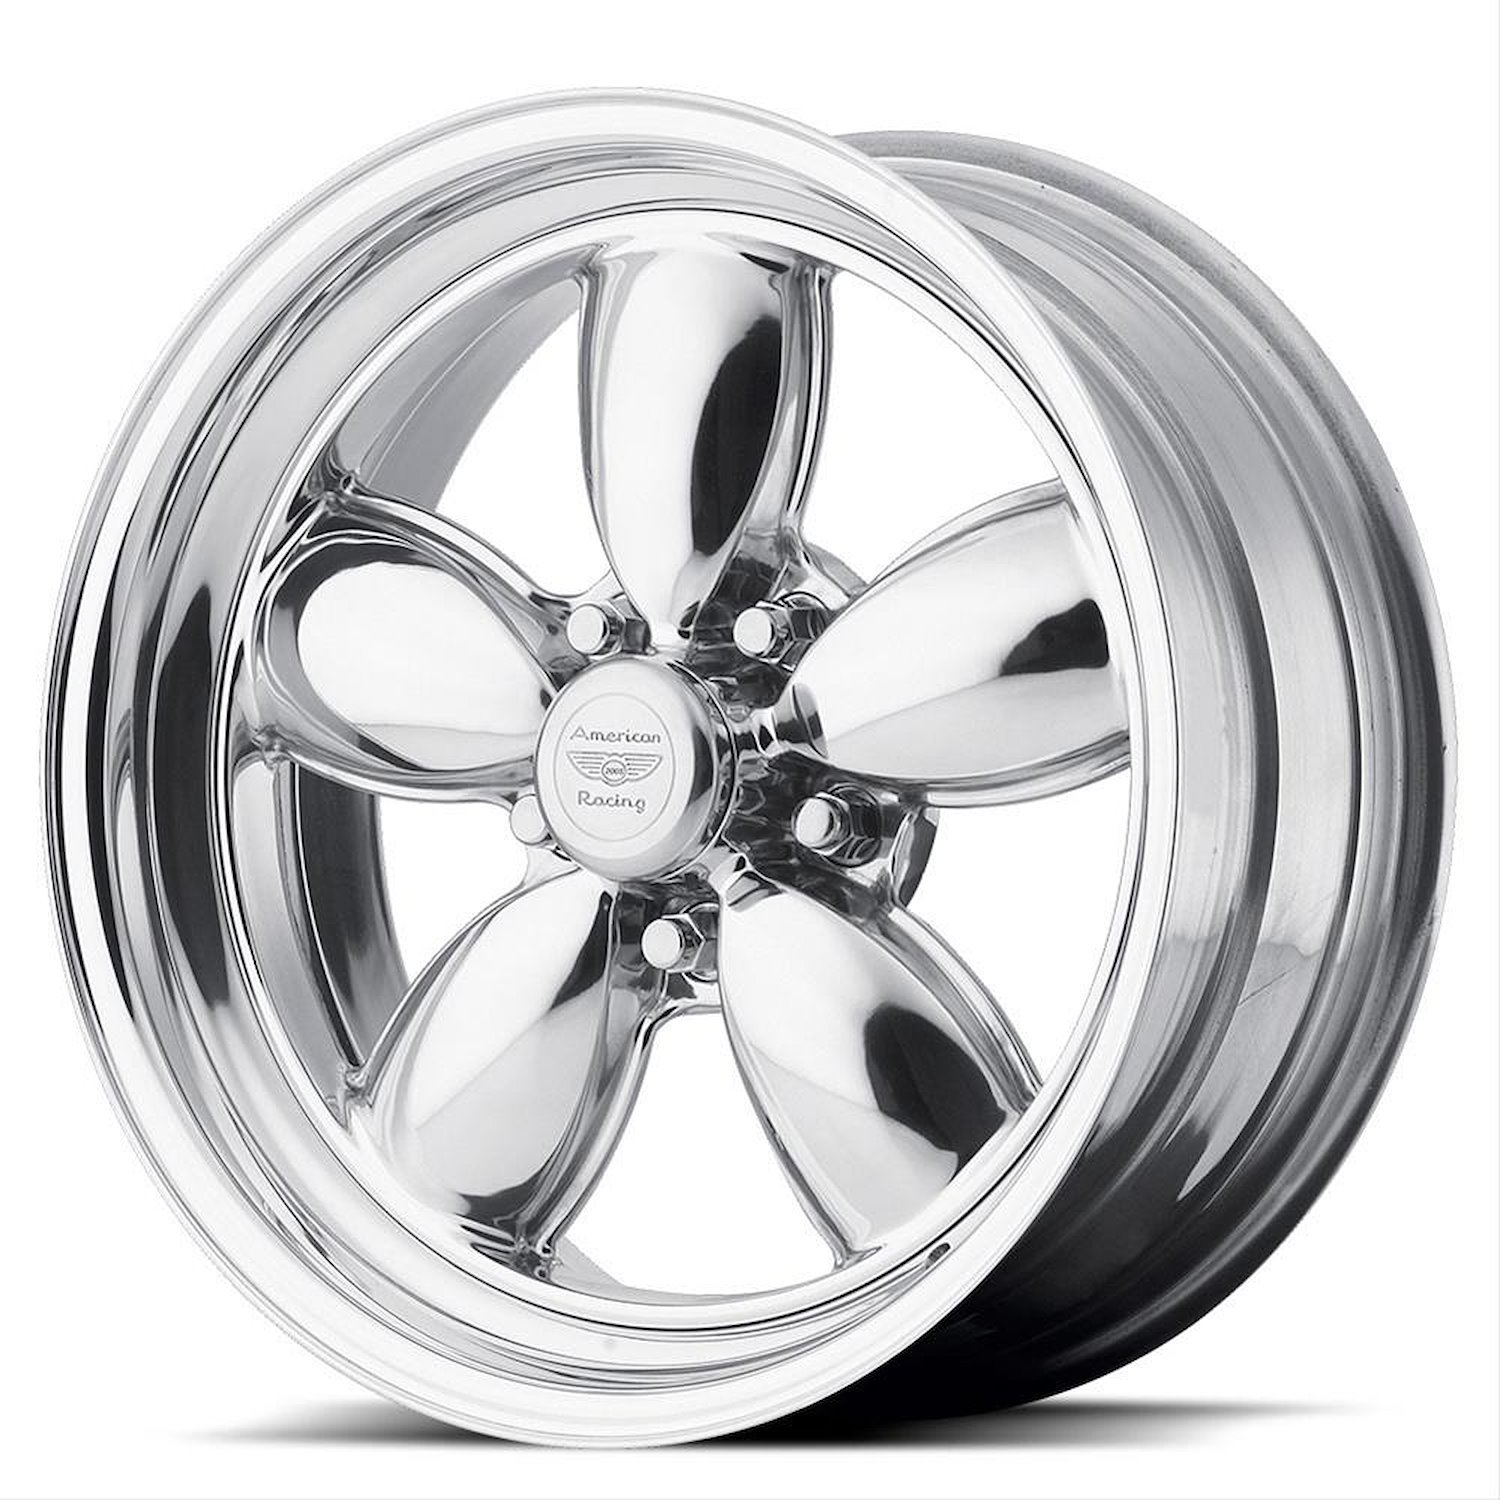 AMERICAN RACING CLASSIC 200S TWO-PIECE POLISHED 17 x 9.5 5X4.75 -14 4.70